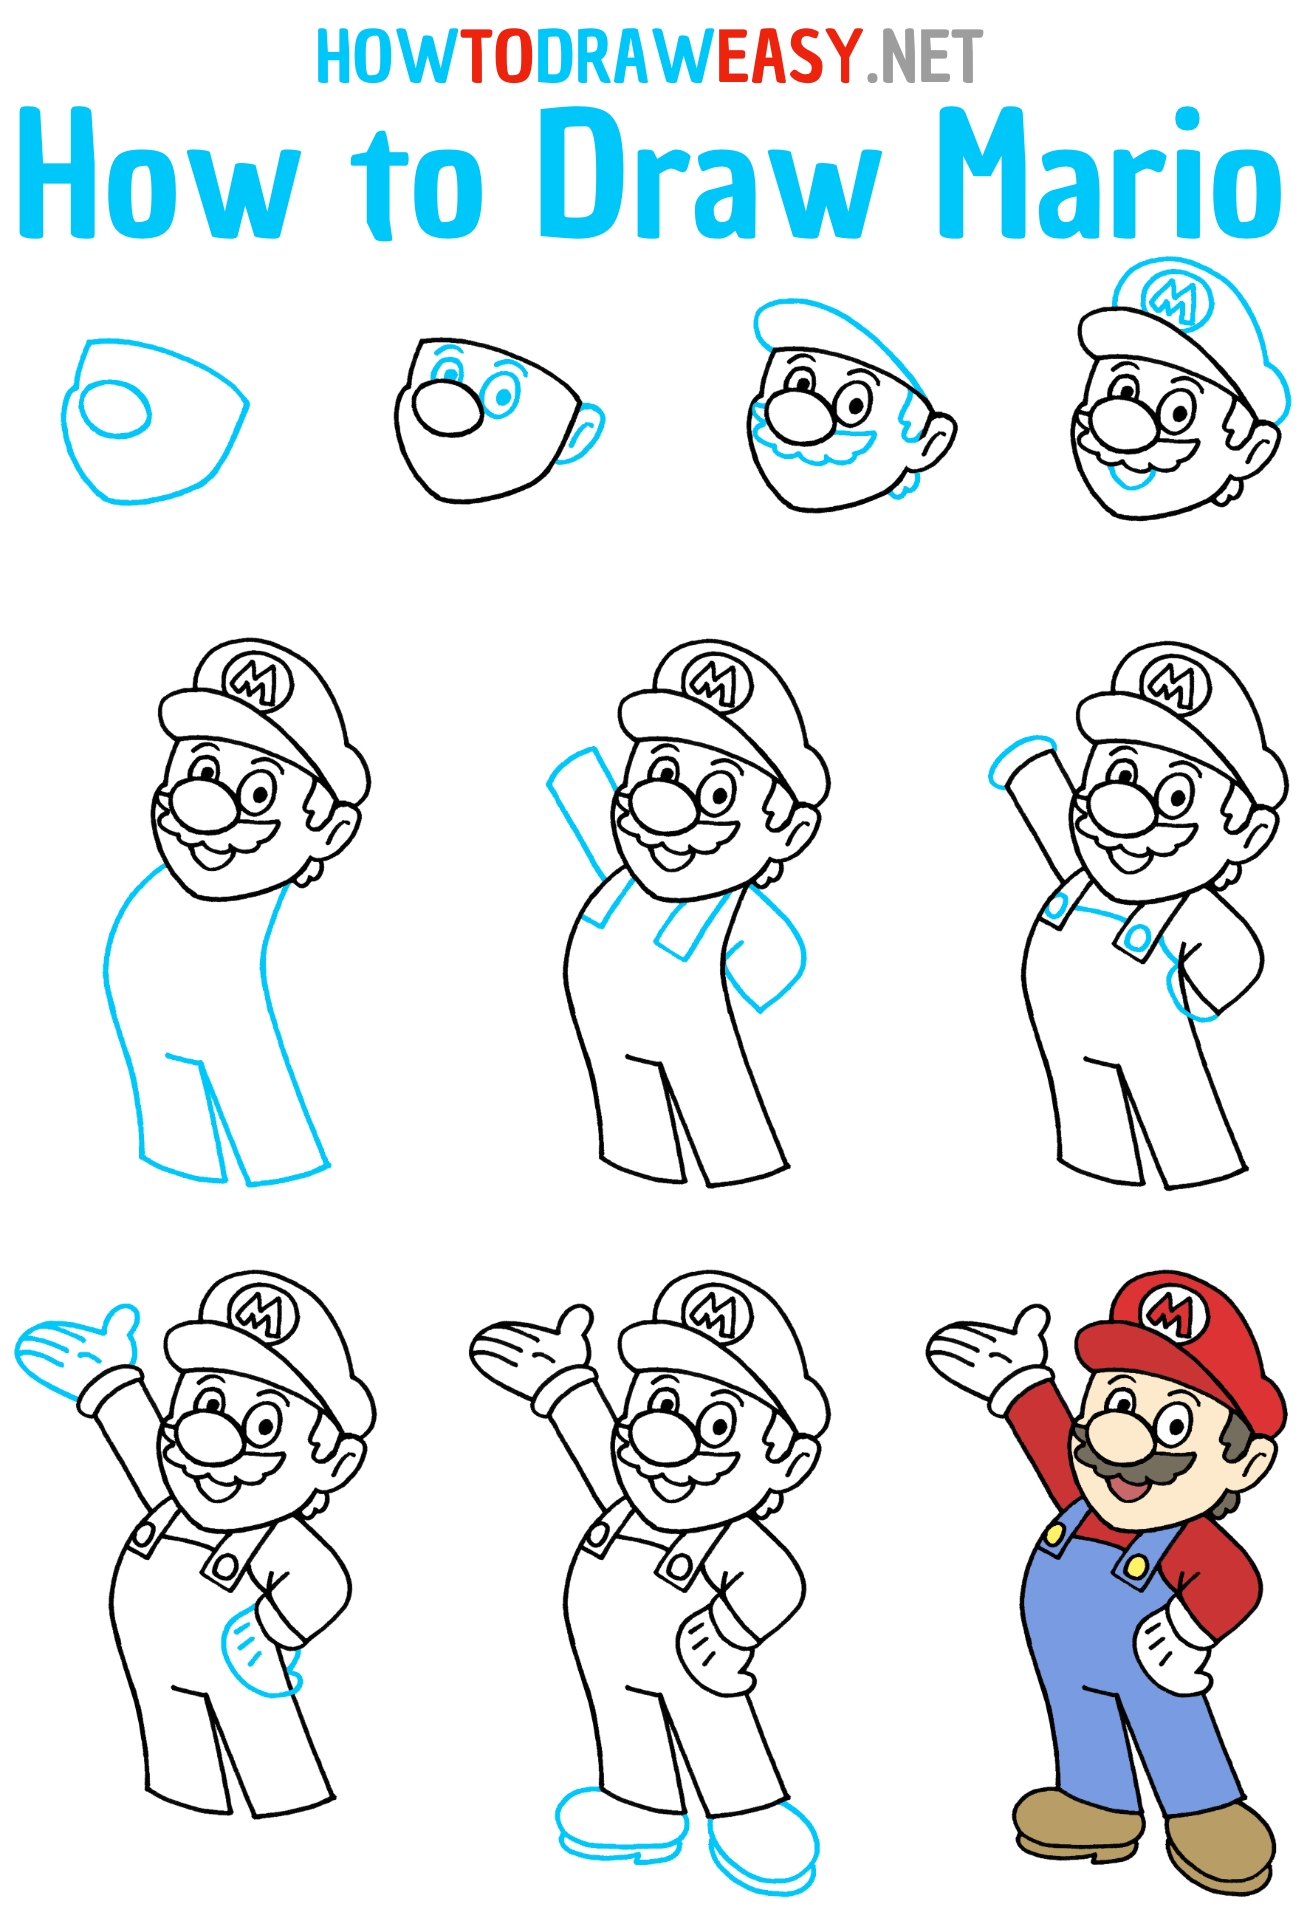 How to Draw Super Mario Step by Step